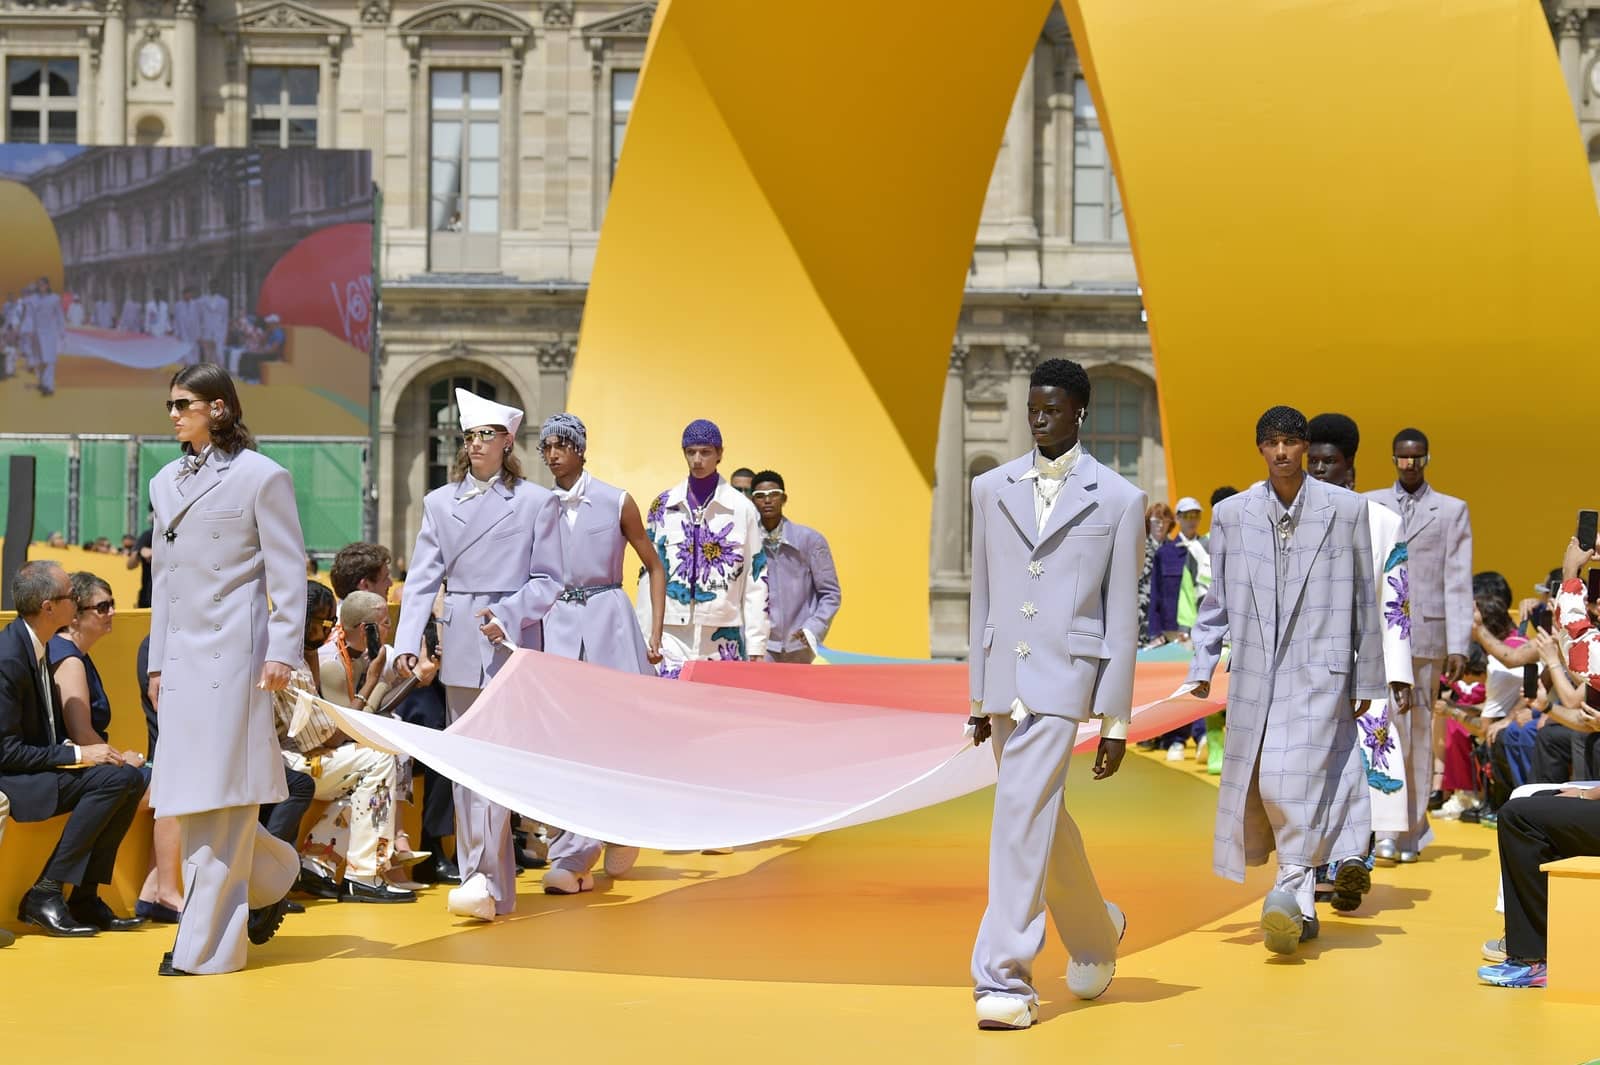 Louis Vuitton Awakens a Child-Like ￼Imagination with SS23 Menswear